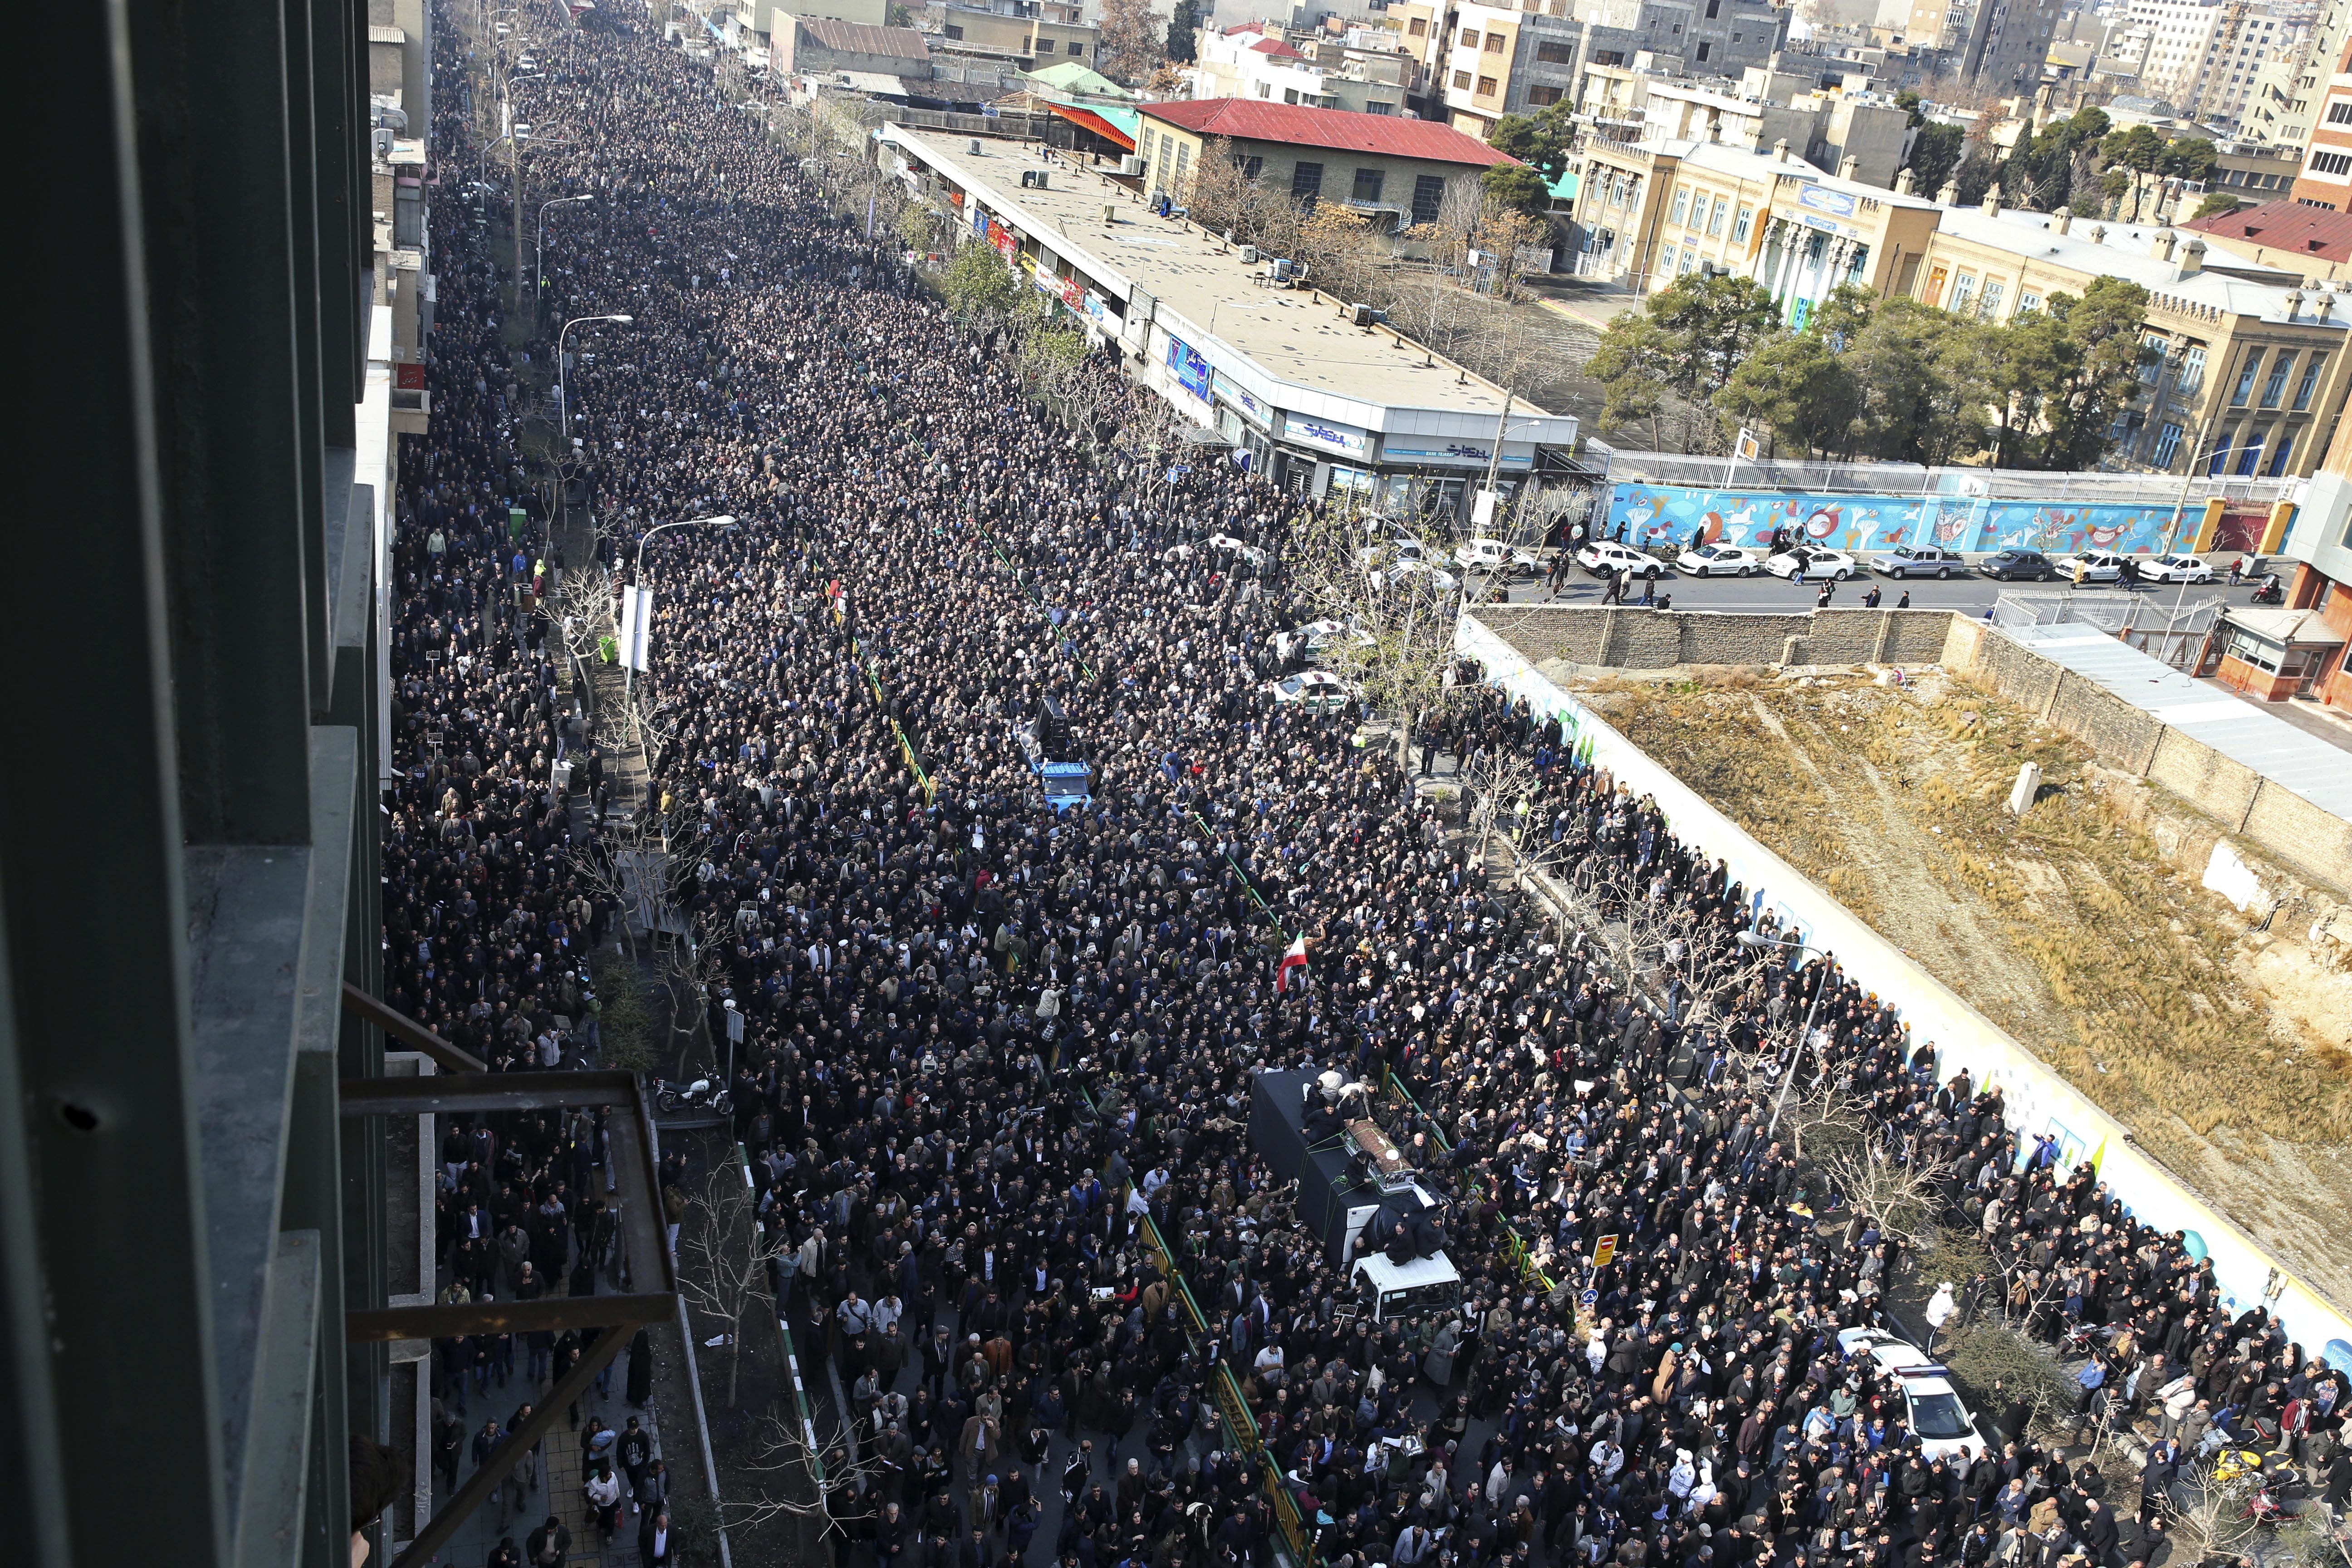 Iranians attend the funeral of former Iranian President Akbar Hashemi Rafsanjani, as his coffin is carried on a truck, in Tehran, Iran, Tuesday, Jan. 10, 2017. Hundreds of thousands of mourners have flooded the streets of Tehran, beating their chests and wailing in grief for Rafsanjani, who died over the weekend at the age of 82. The crowds have filled main thoroughfares of the capital as top government and clerical officials held a funeral service at Tehran University. (AP Photo/Vahid Salemi)